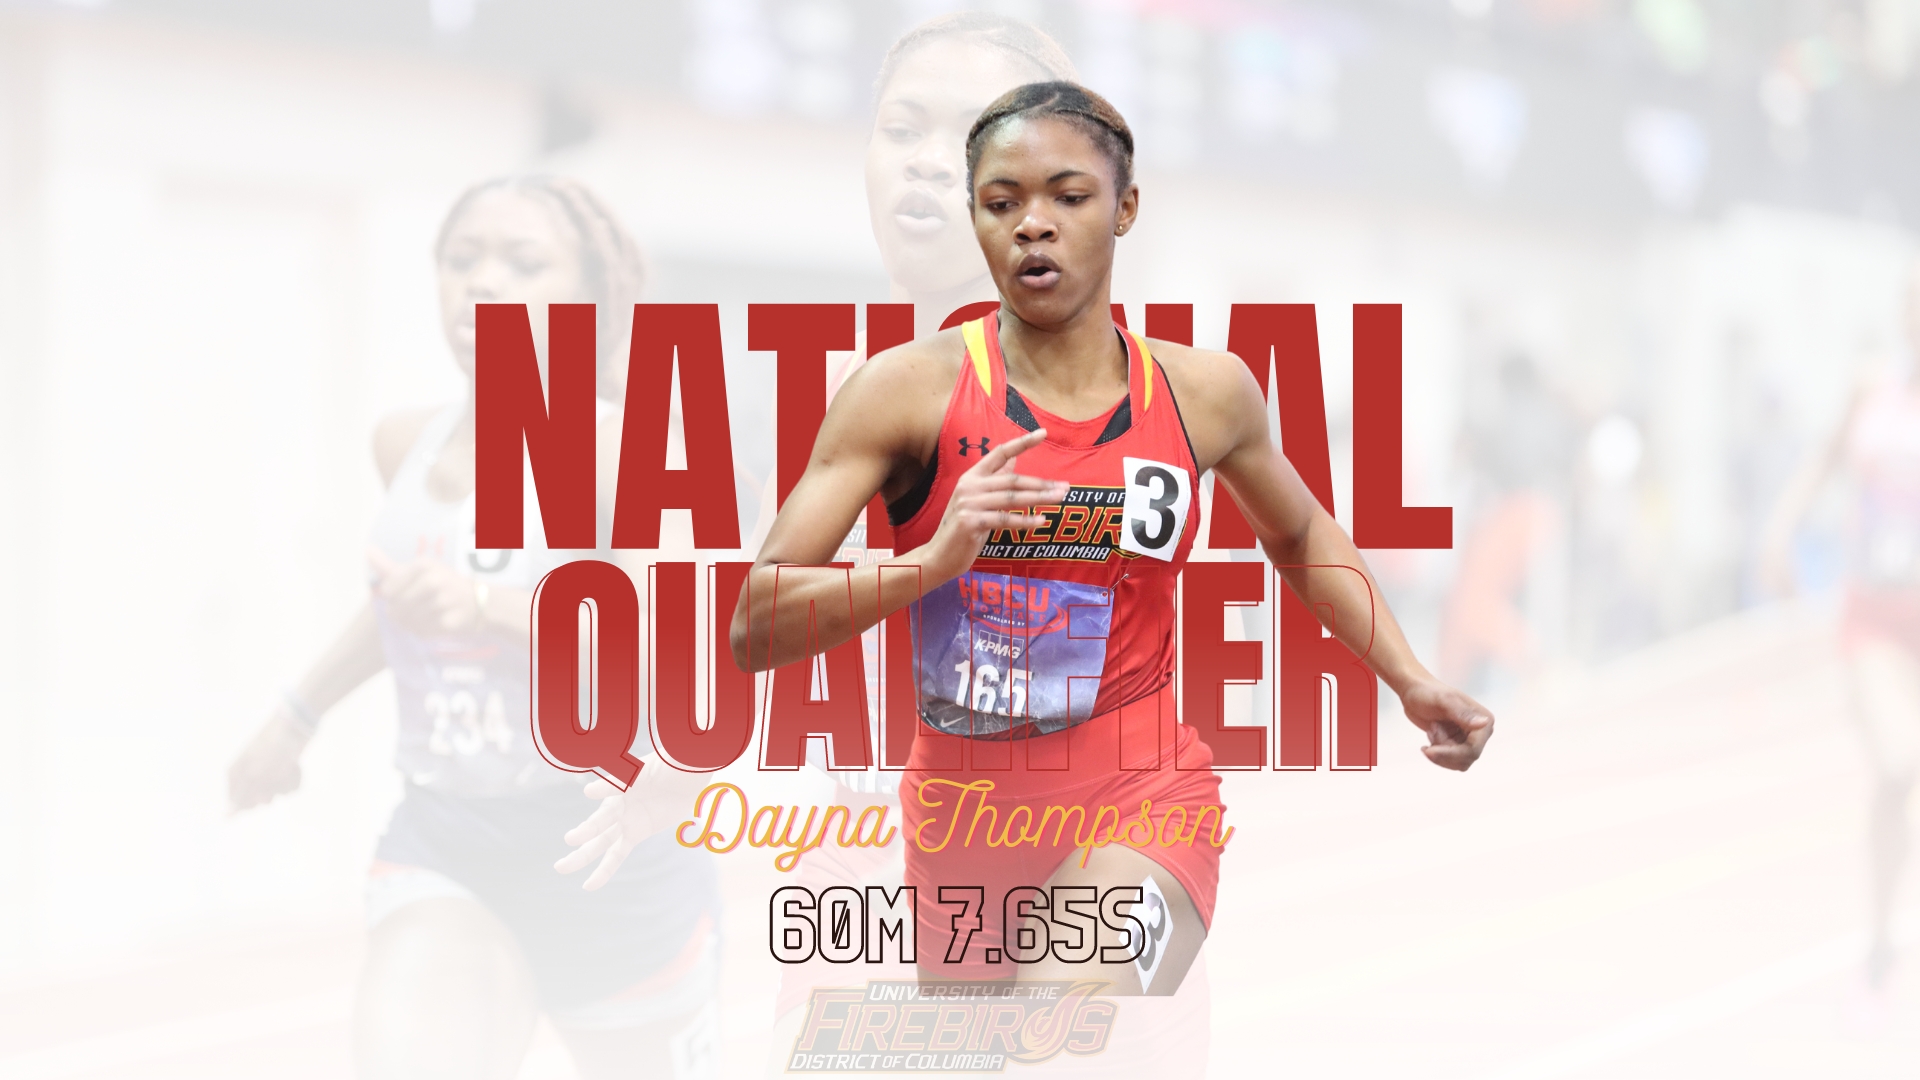 Thompson Clocks National Qualifying Standard; Breaks Two More Records